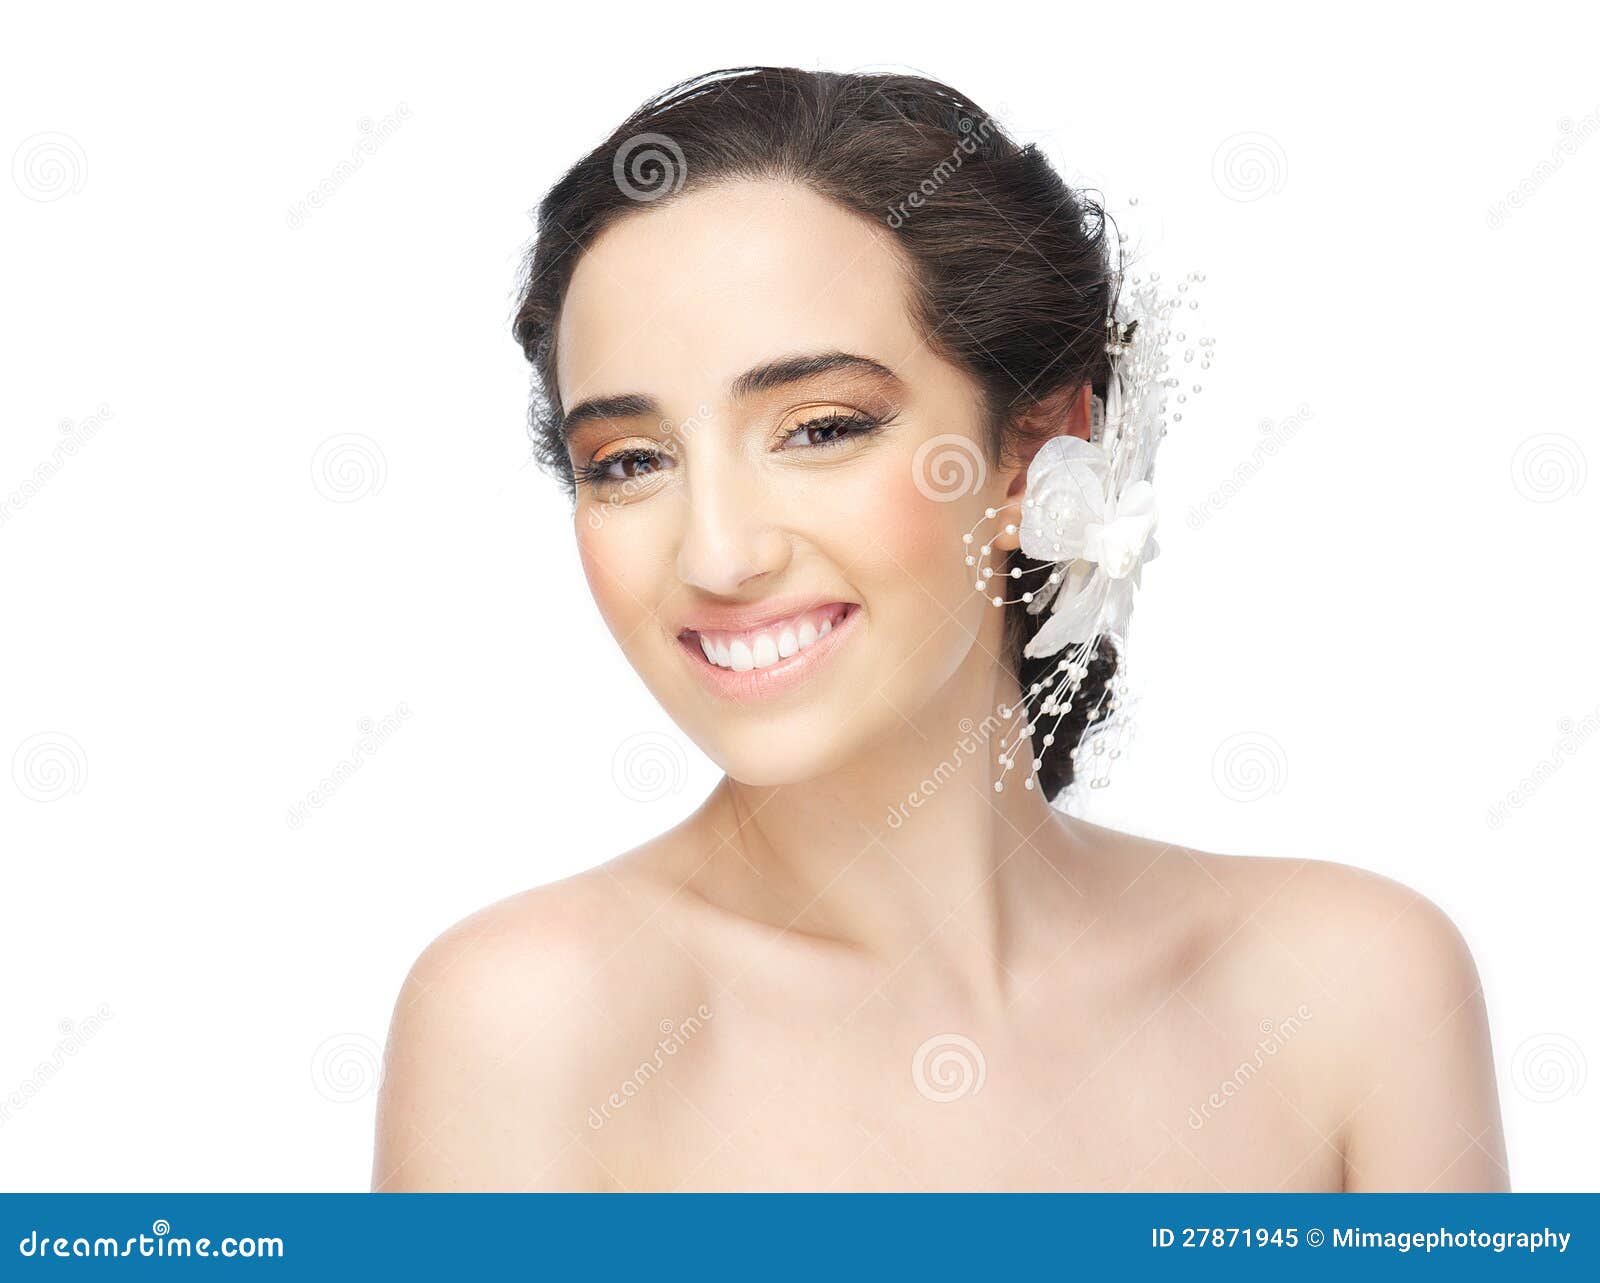 Blond Woman With Naked Shoulders Smiling Stock Image 